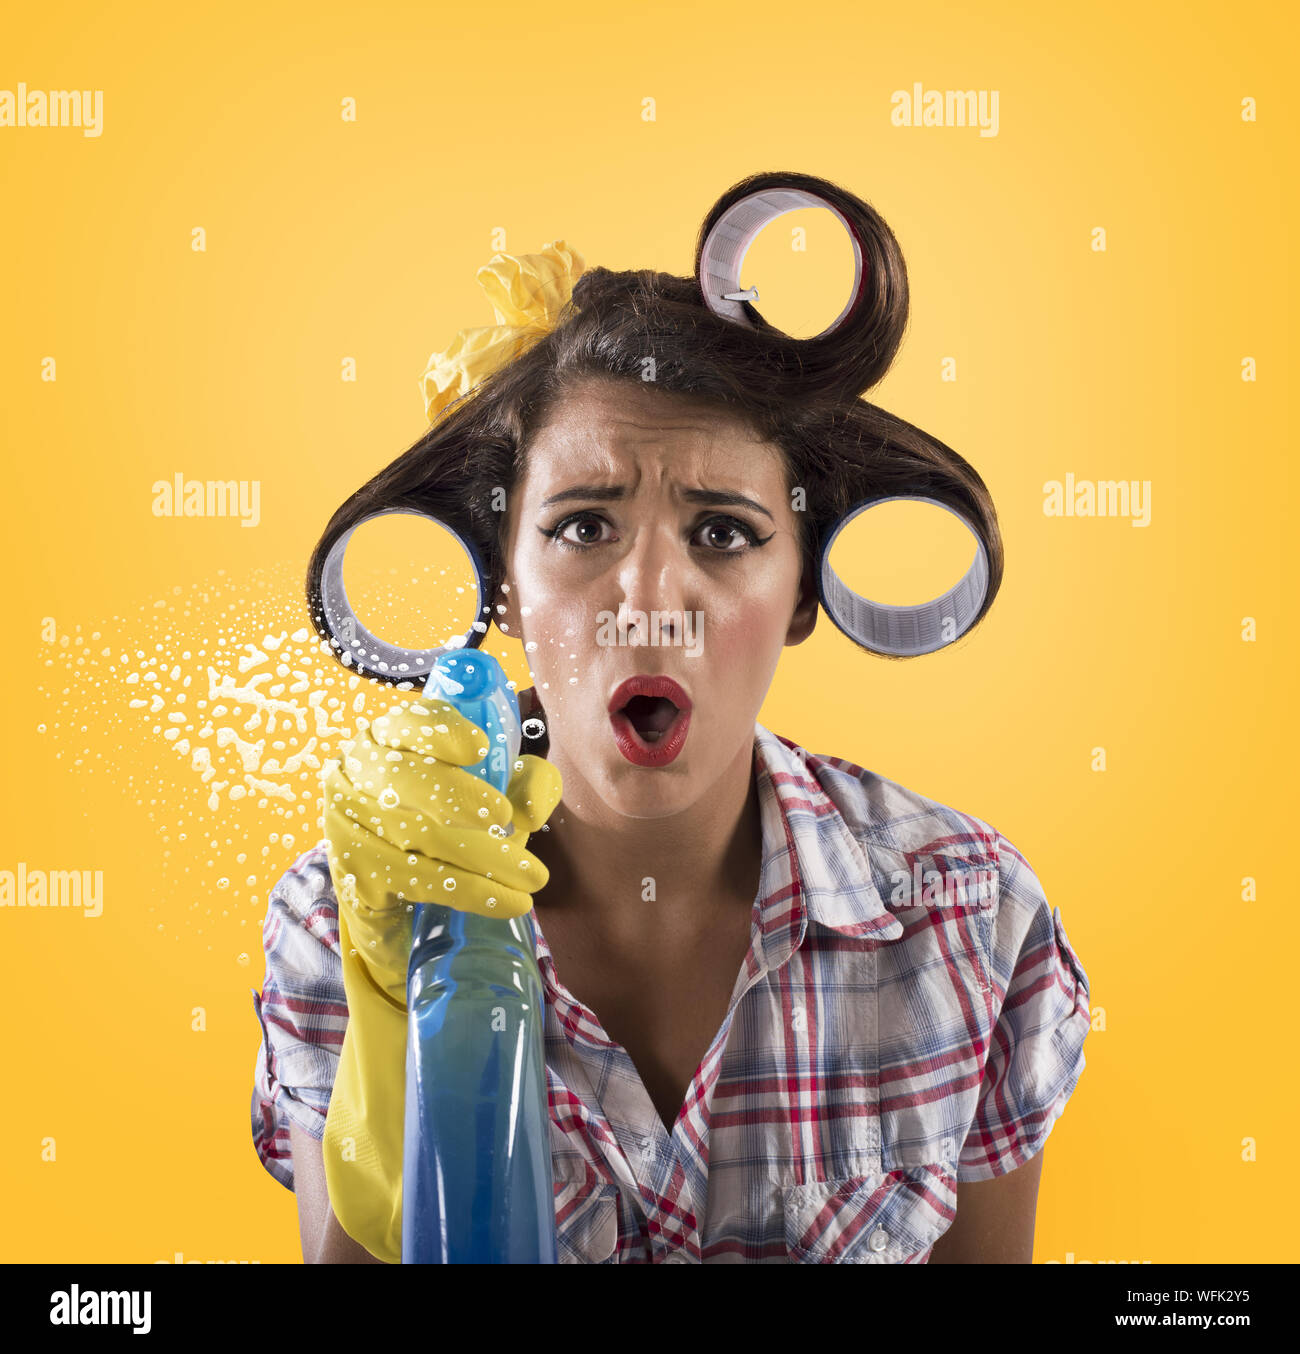 Girl housewife with gloves and spray ready to clean Stock Ph